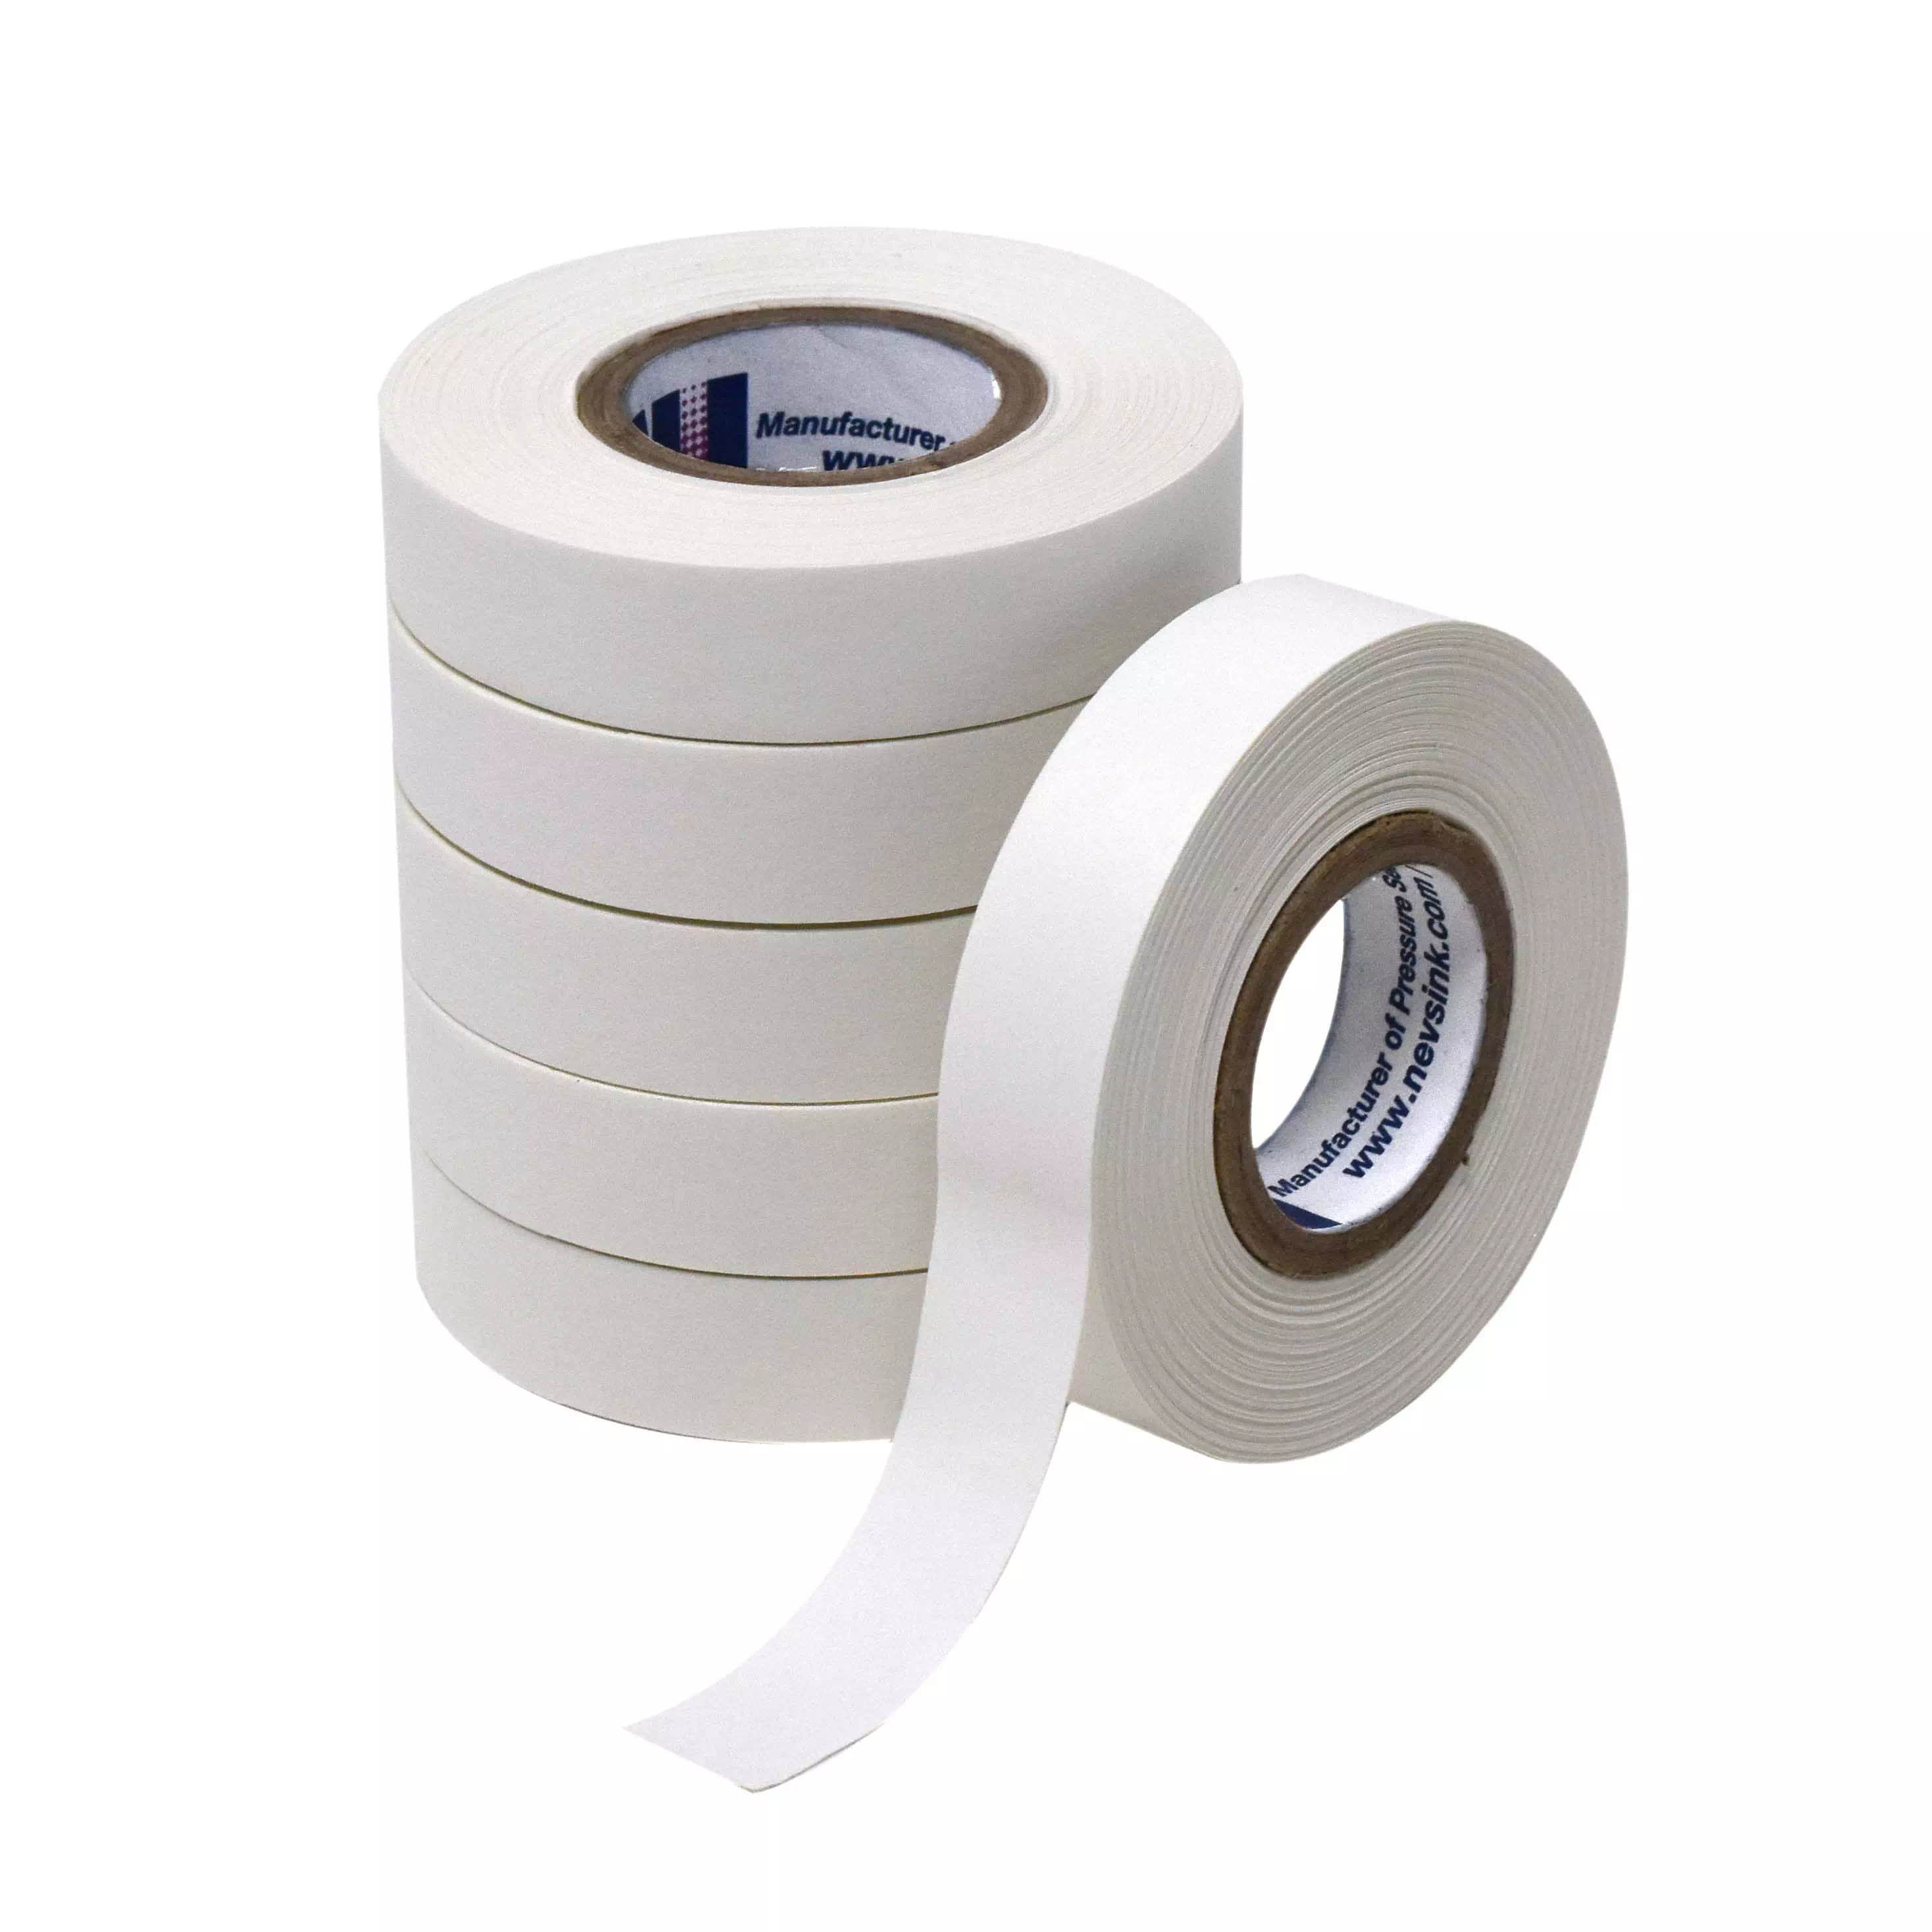 1/2" wide x 500" White Labeling Tape